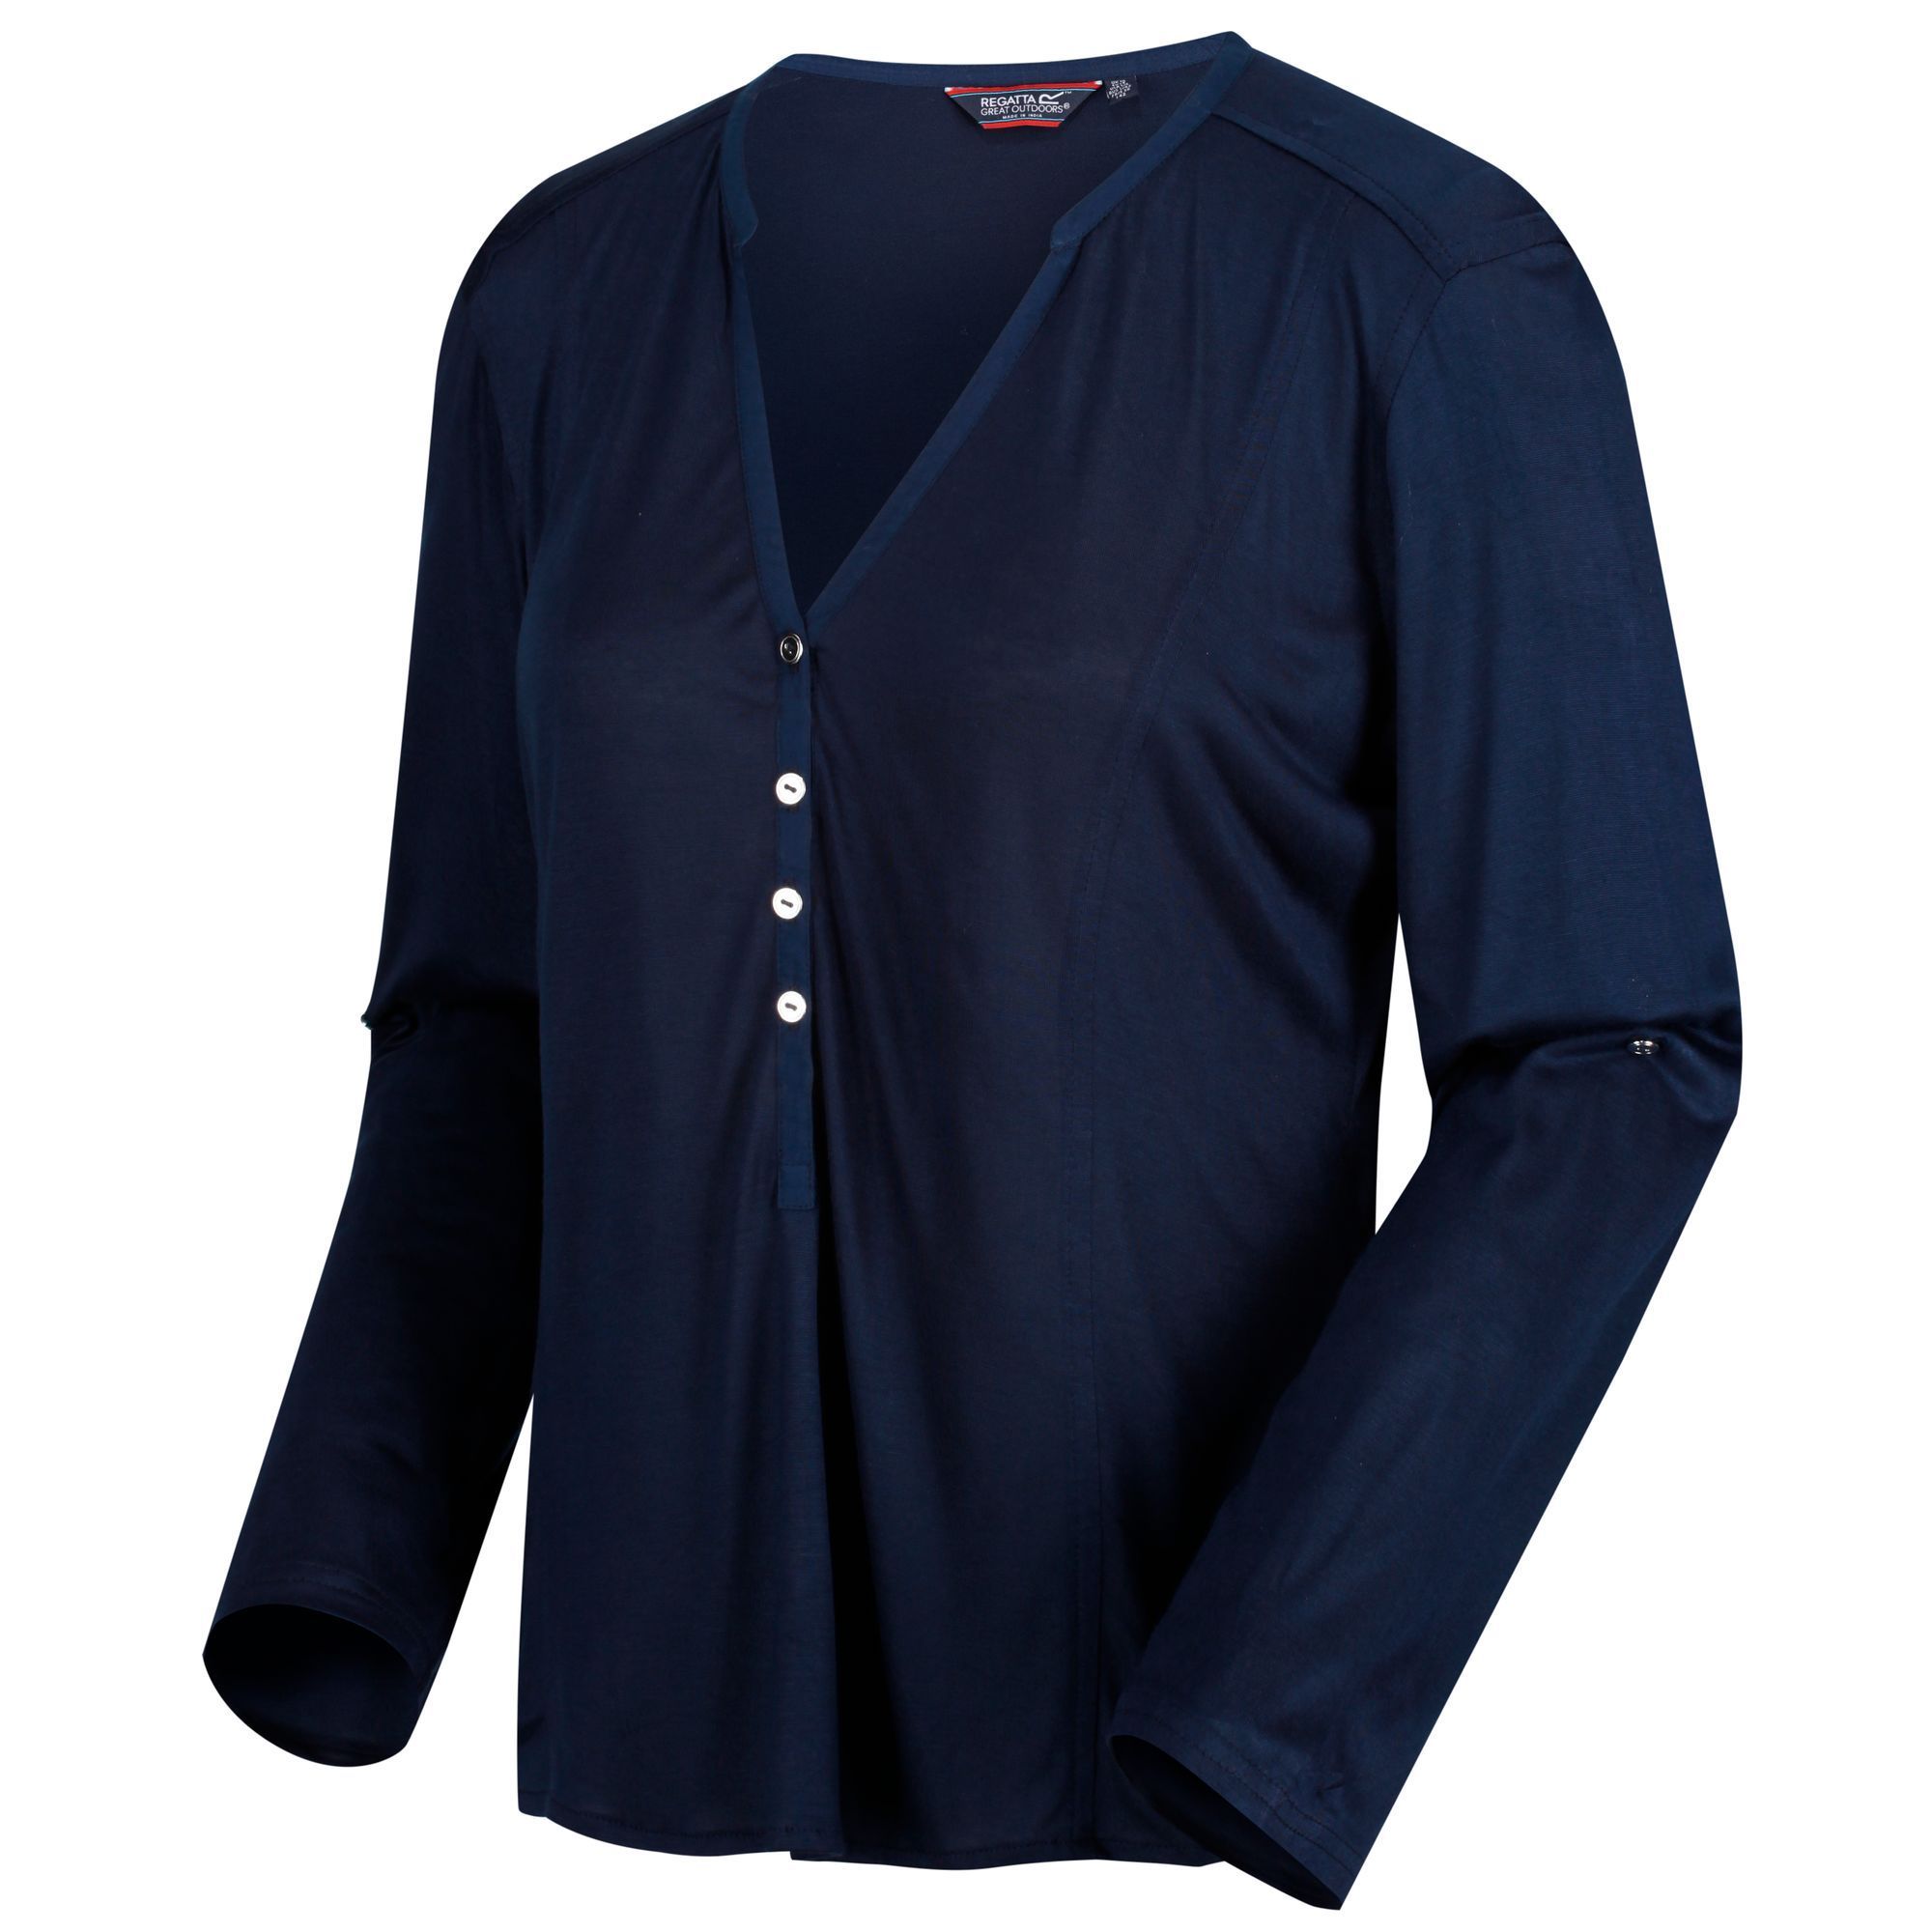 100% Viscose. 4 button narrow placket. Woven fabric trim detail. Roll up sleeves with button tab.